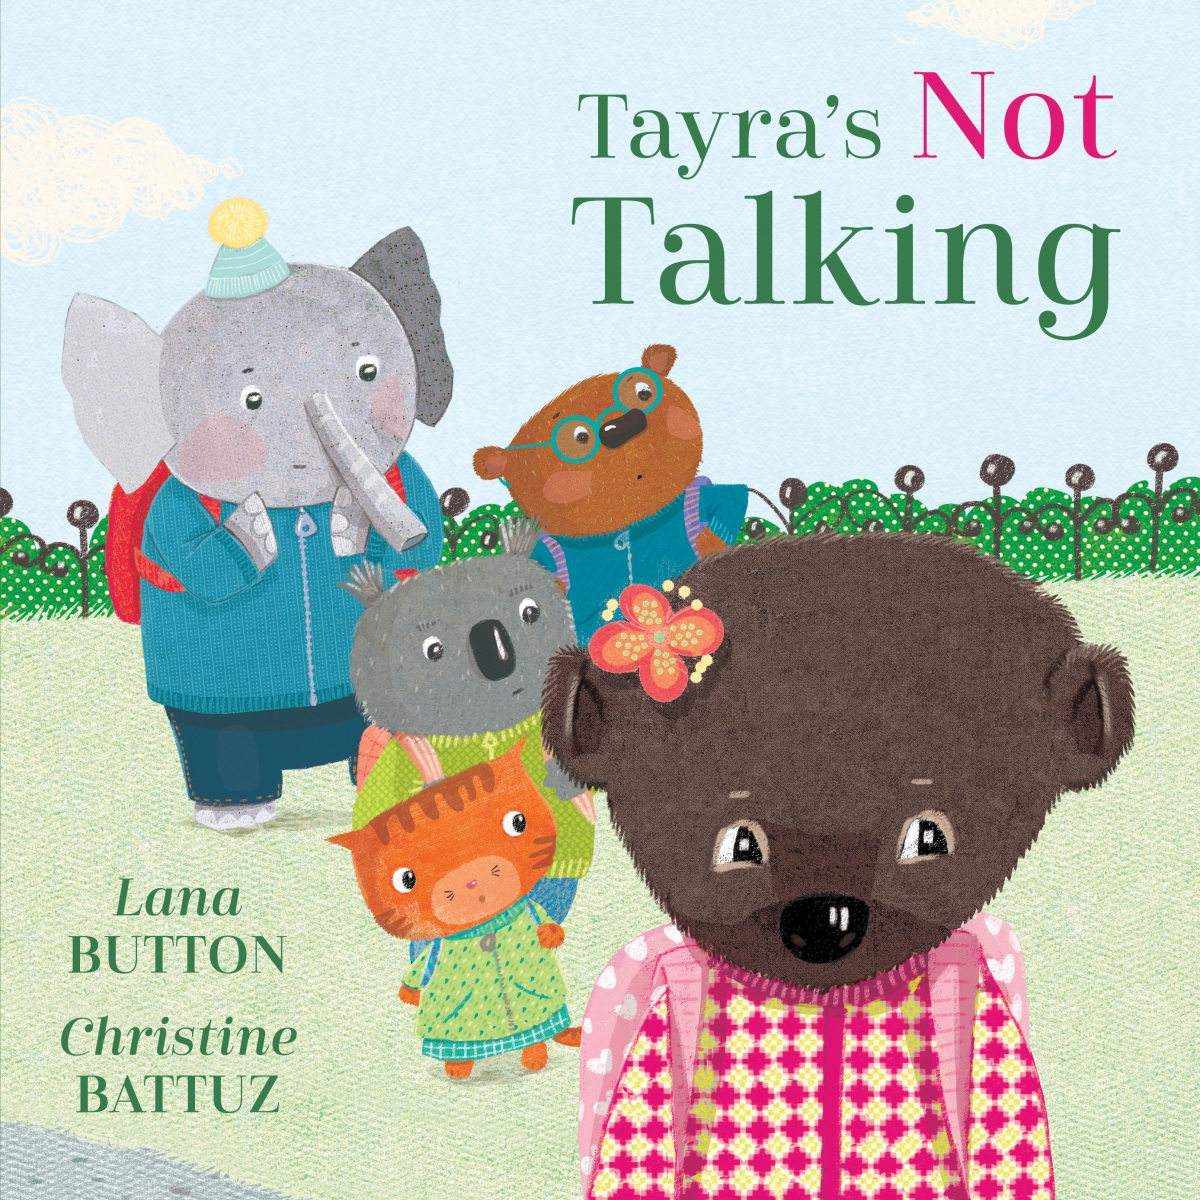 Tayra's NOT talking, but there are many ways to make a friend!